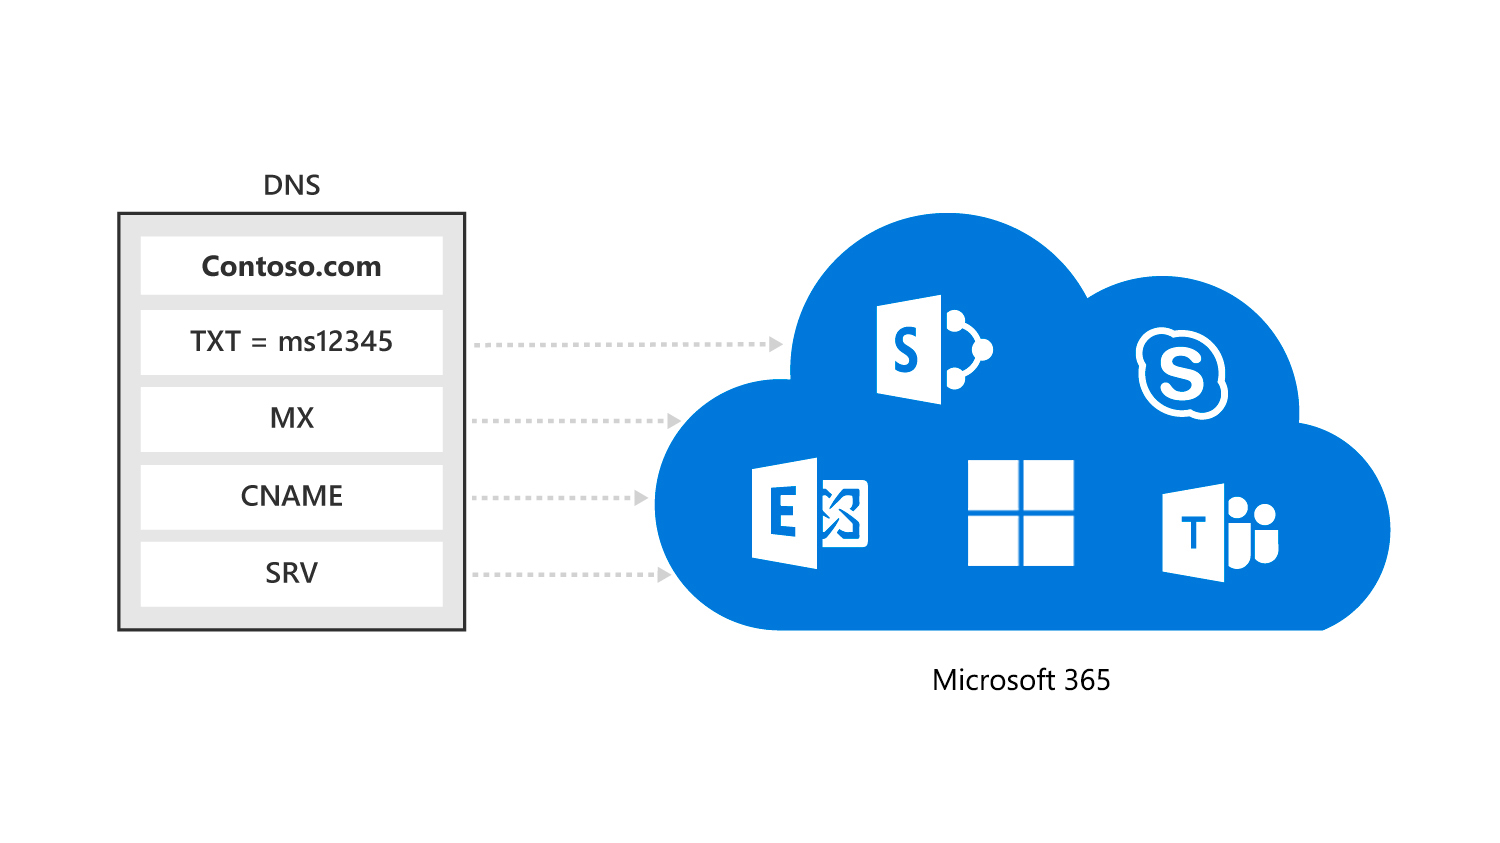 diagram shows how an organization only needs to configure pointers to Microsoft 365 to use their custom domain names in Microsoft 365